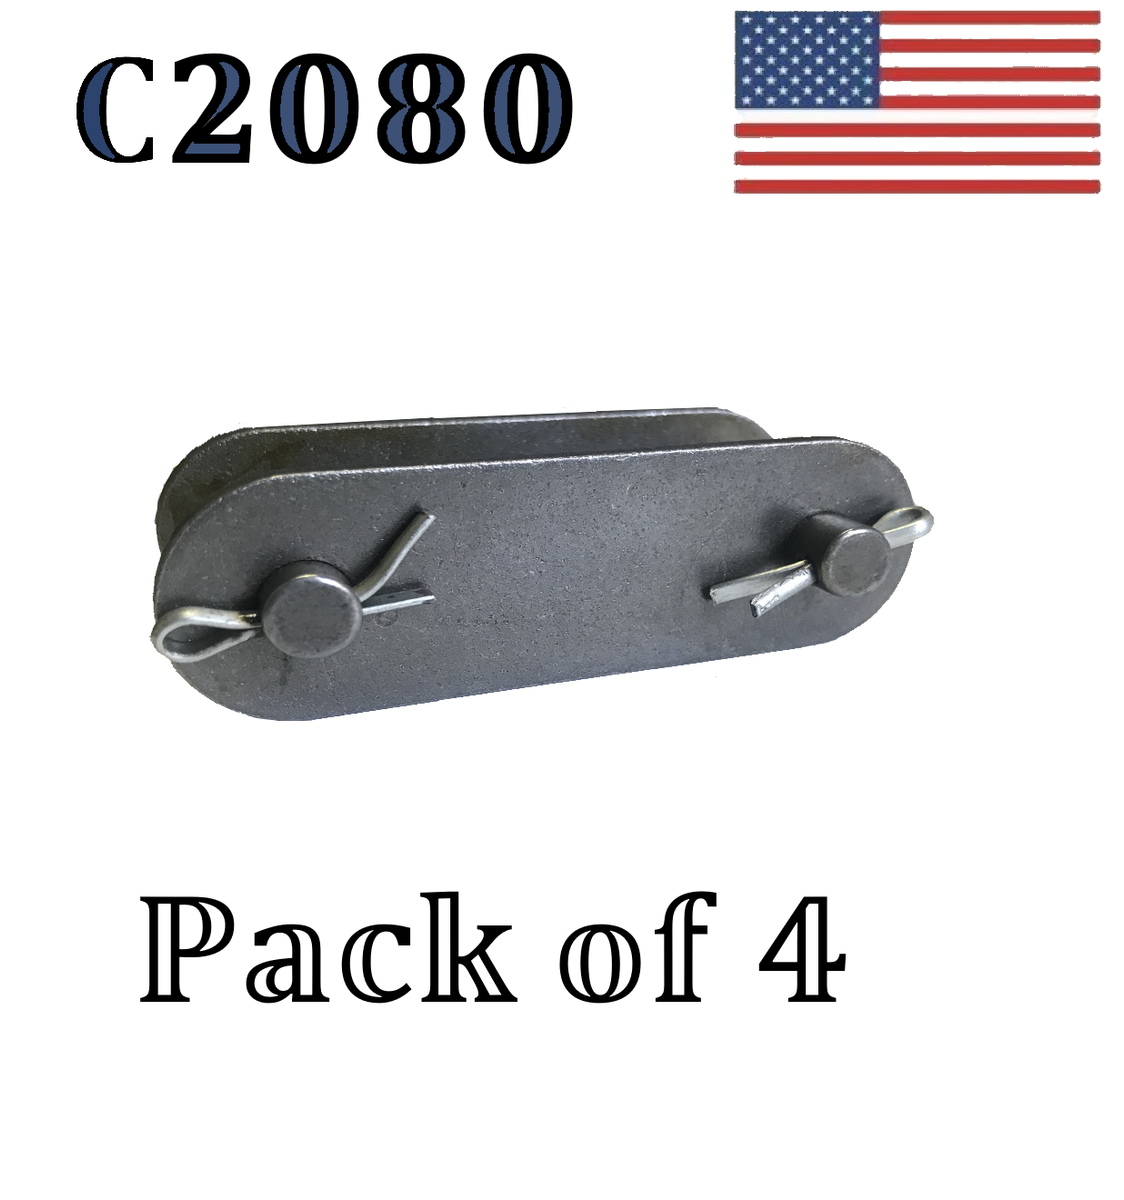 C2080 Connecting Link #C2080 Conveyor roller chain 2" Pitch Master 4 pack 